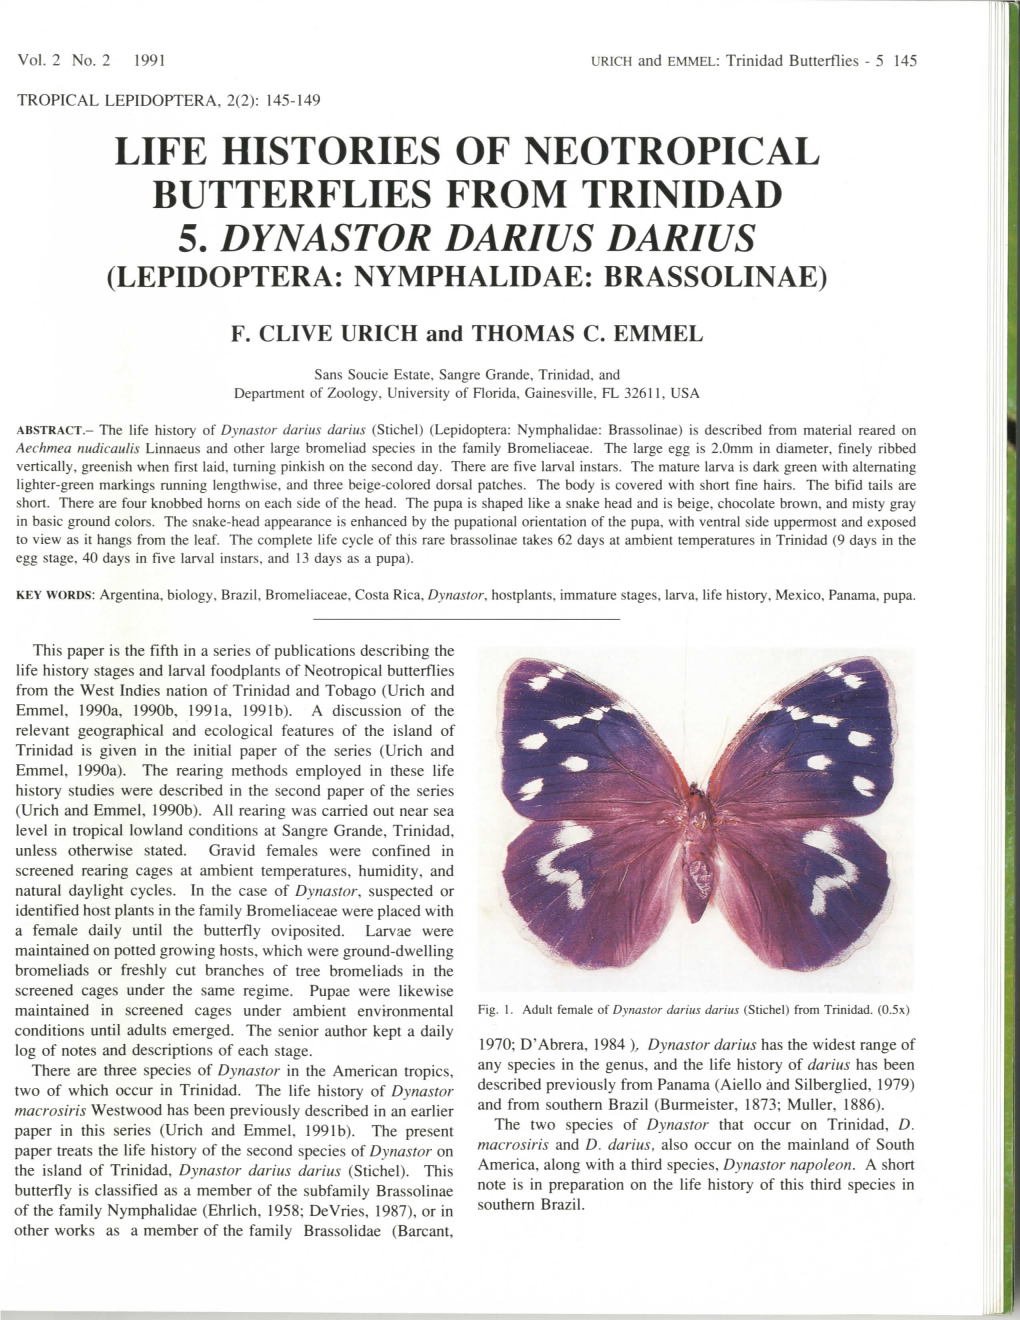 Life Histories of Neotropical Butterflies from Trinidad 5